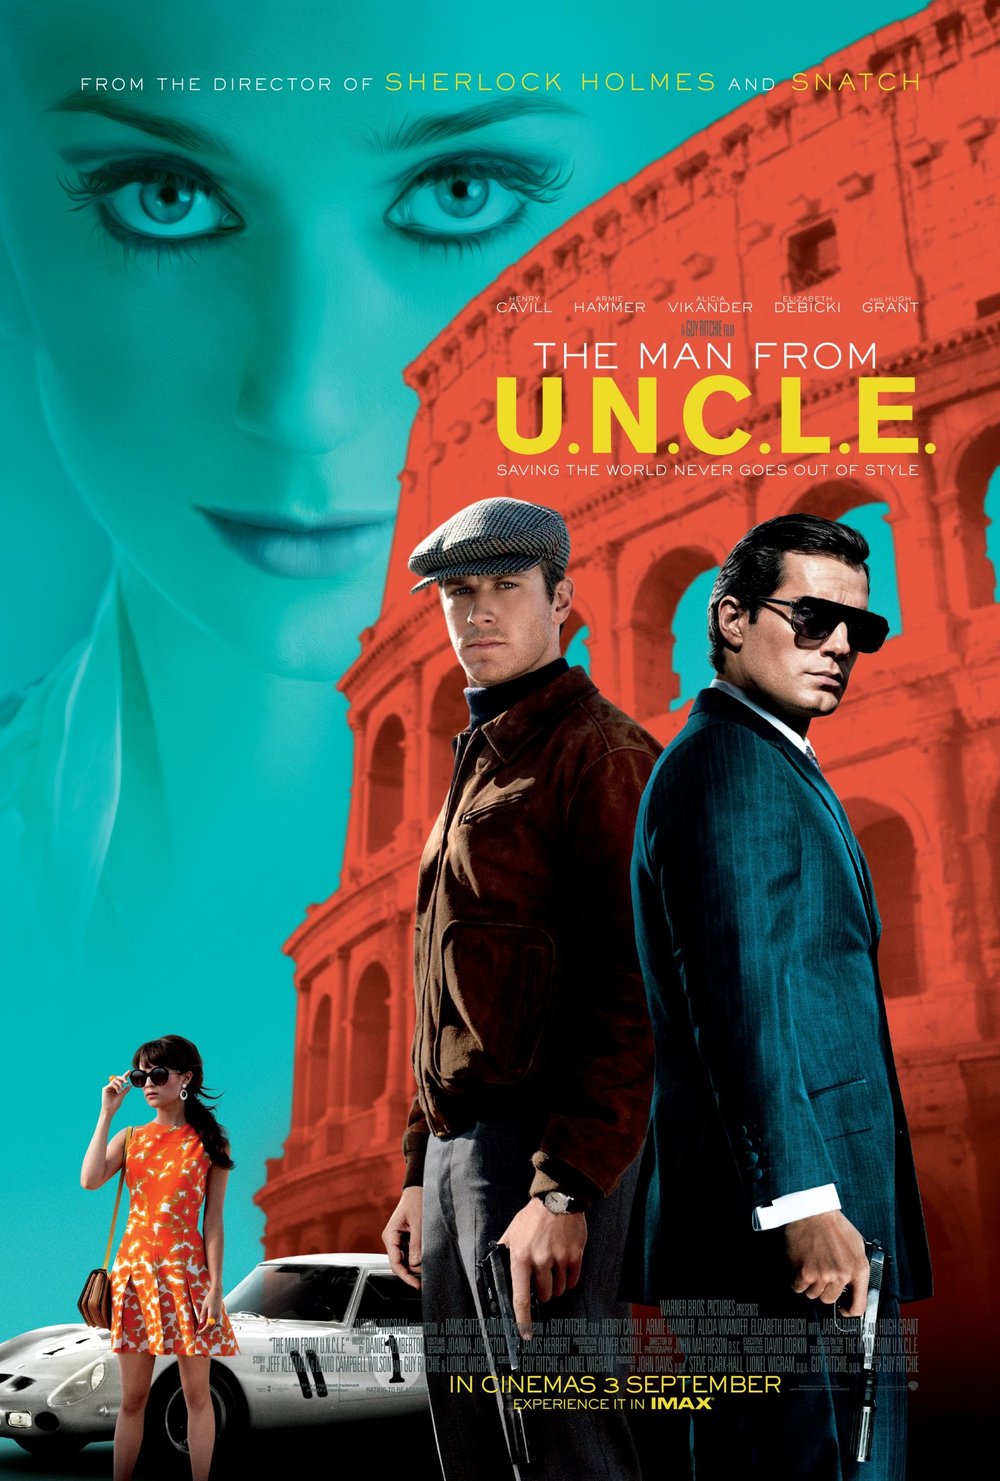 themanfromuncle.jpg